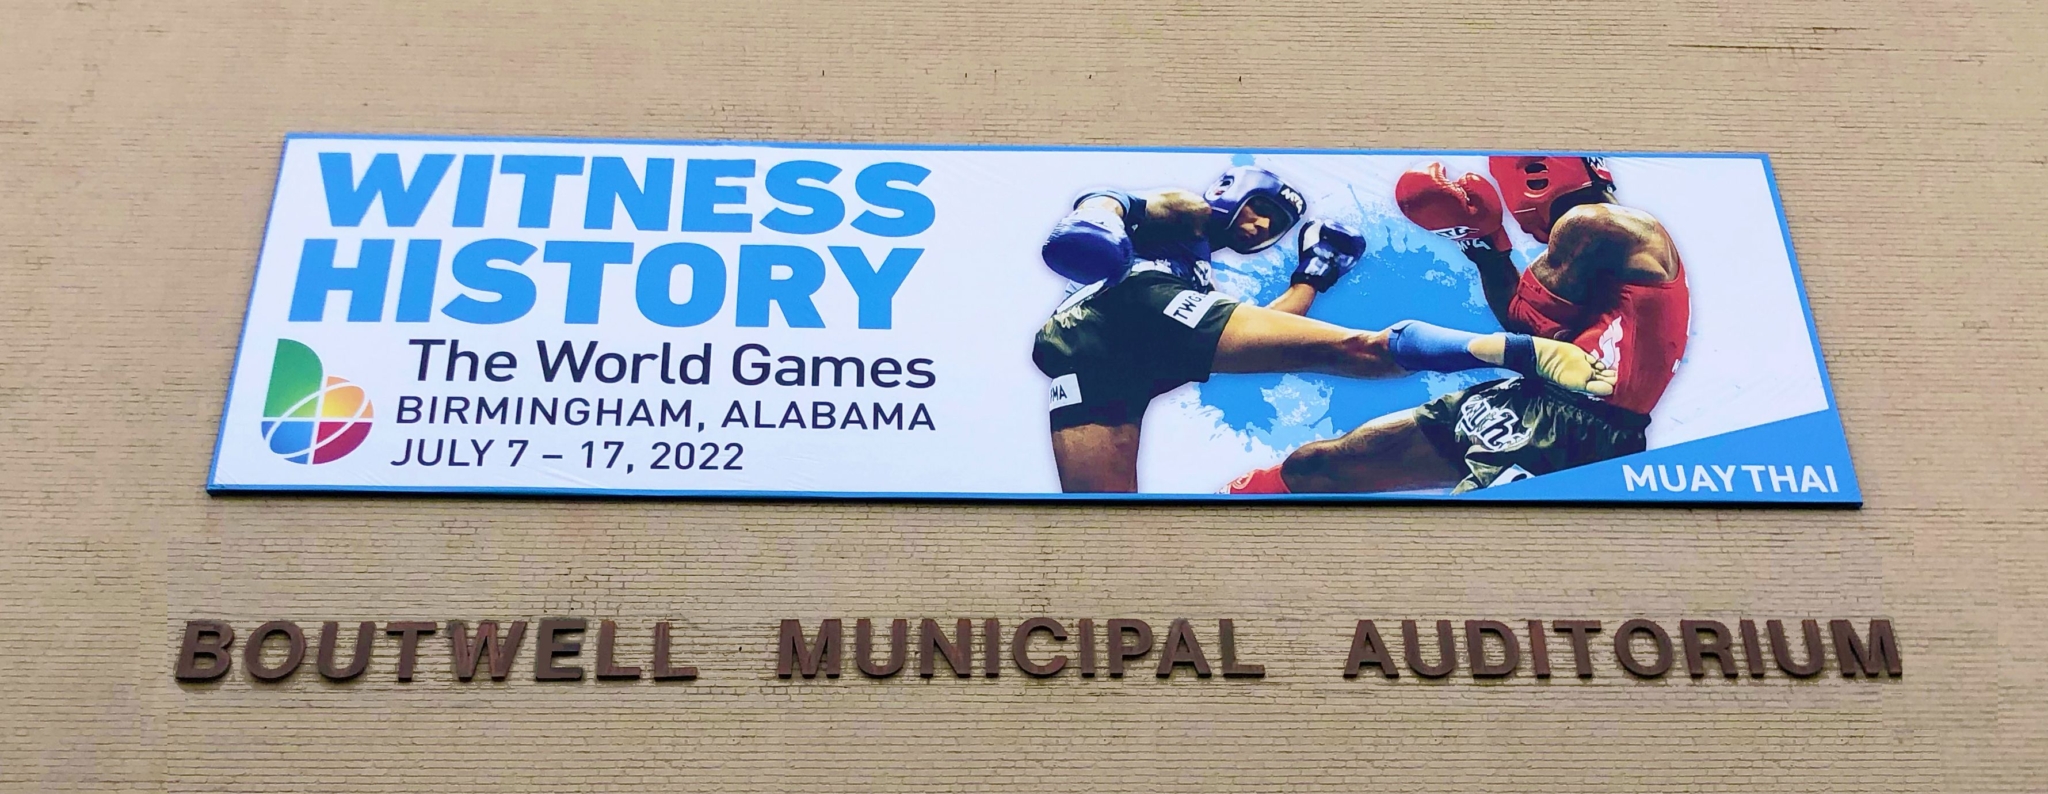 sign at one of the venues for the world games